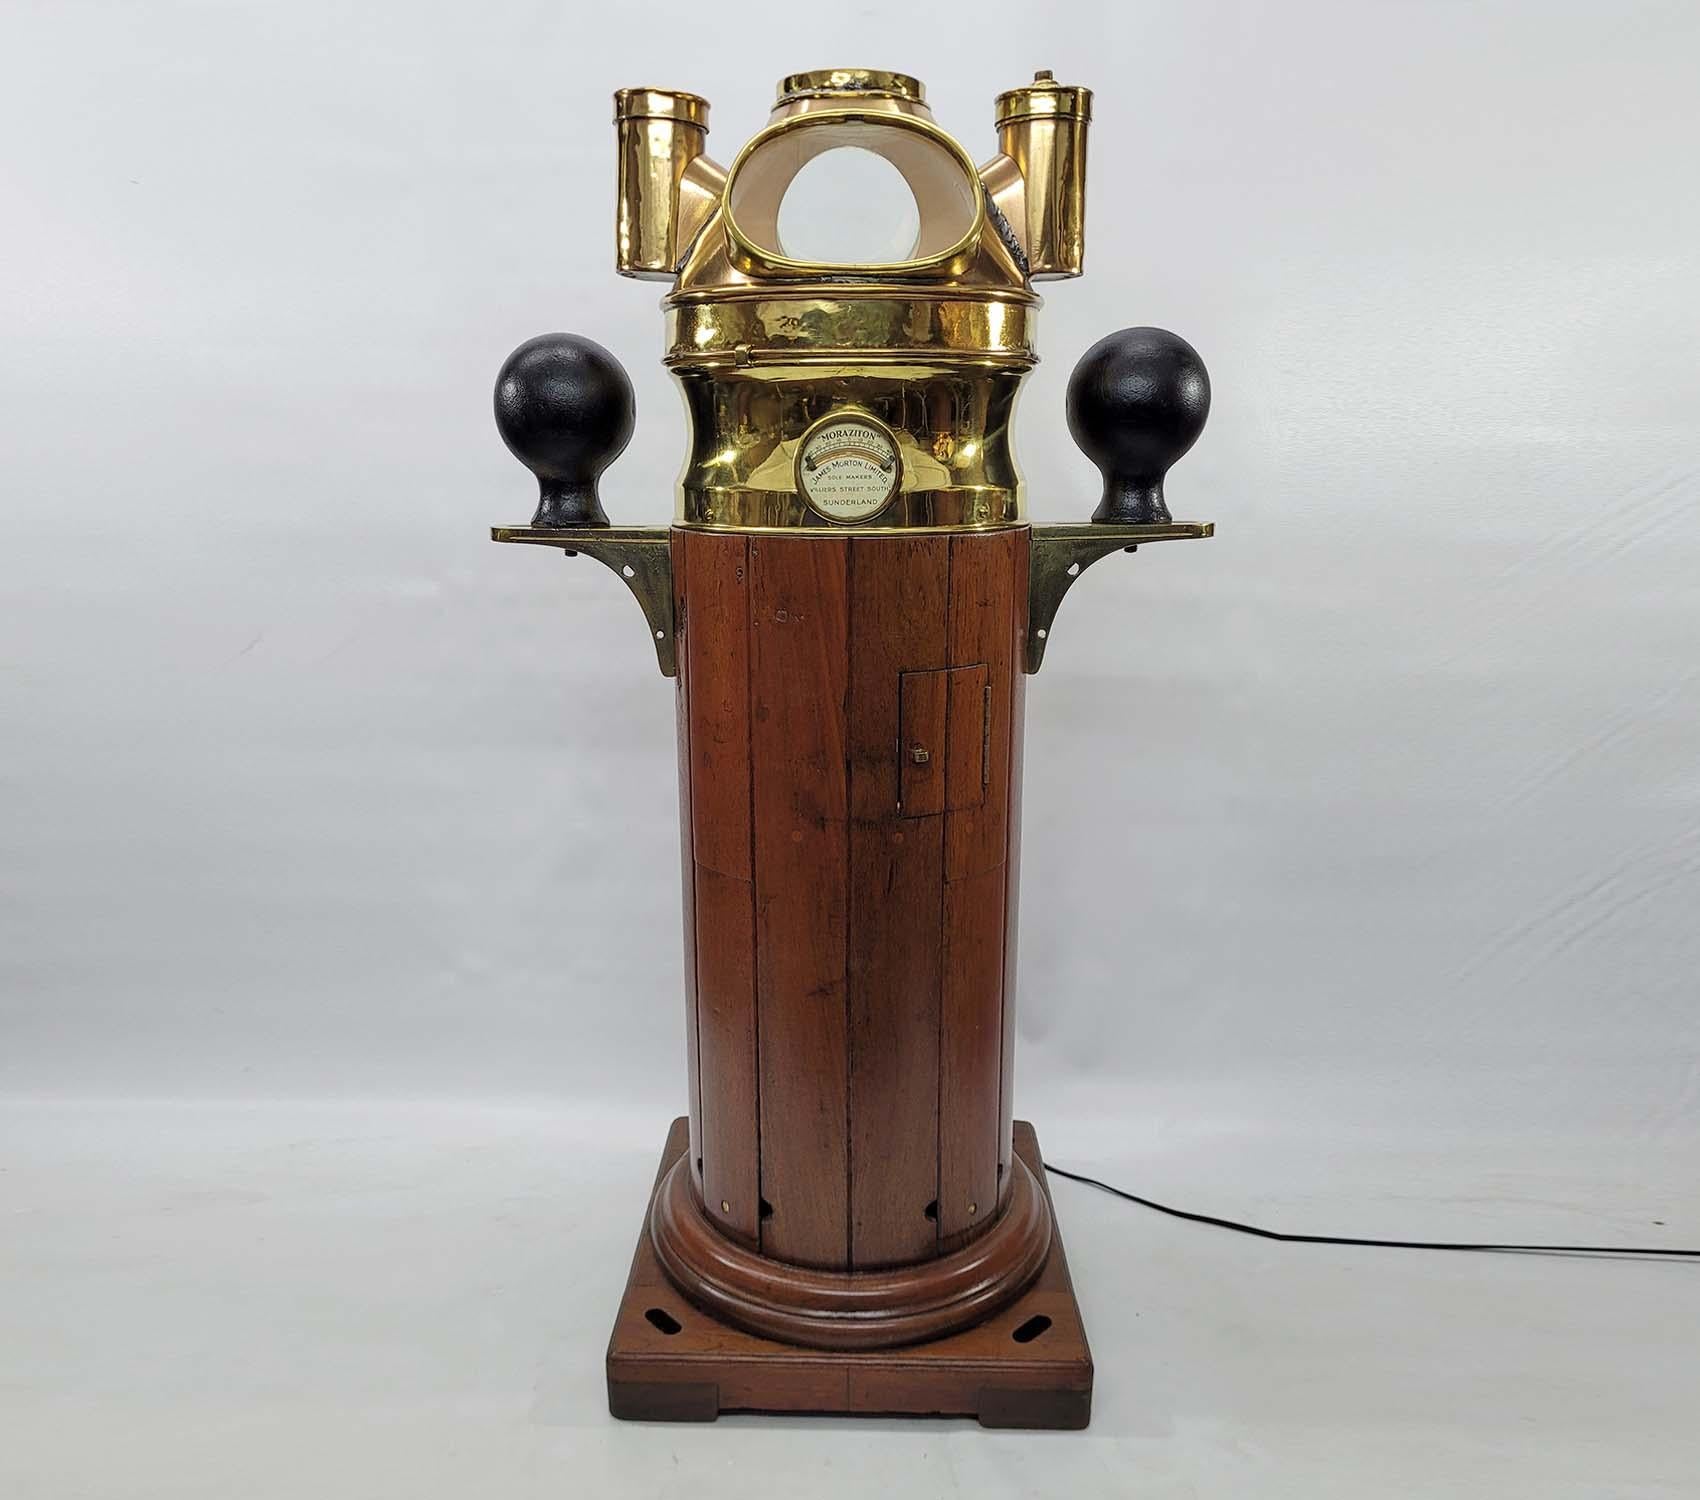 Exceptional ships binnacle by James Morton Limited of Sunderland. This is the “Capitalize Morabiton” model. A clinometer is fitted into the mermaid’s waist style compass shroud. The original compass hangs from davits inside. Varnished base with